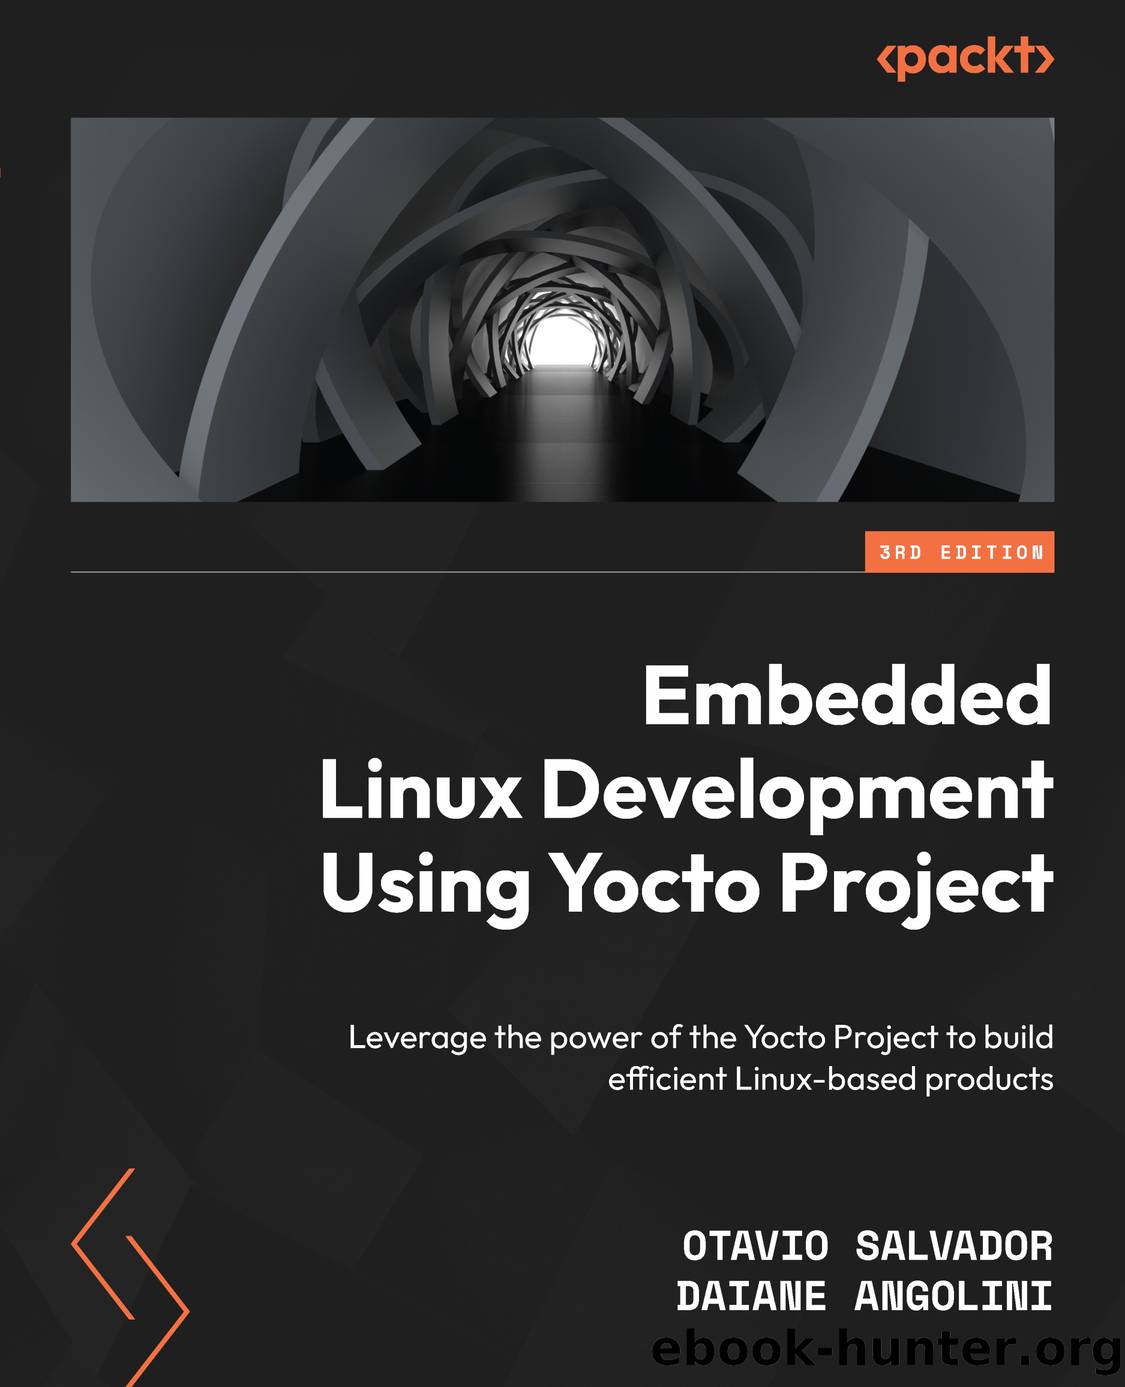 Embedded Linux Development Using Yocto Project - Third Edition by Otavio Salvador & Daiane Angolini